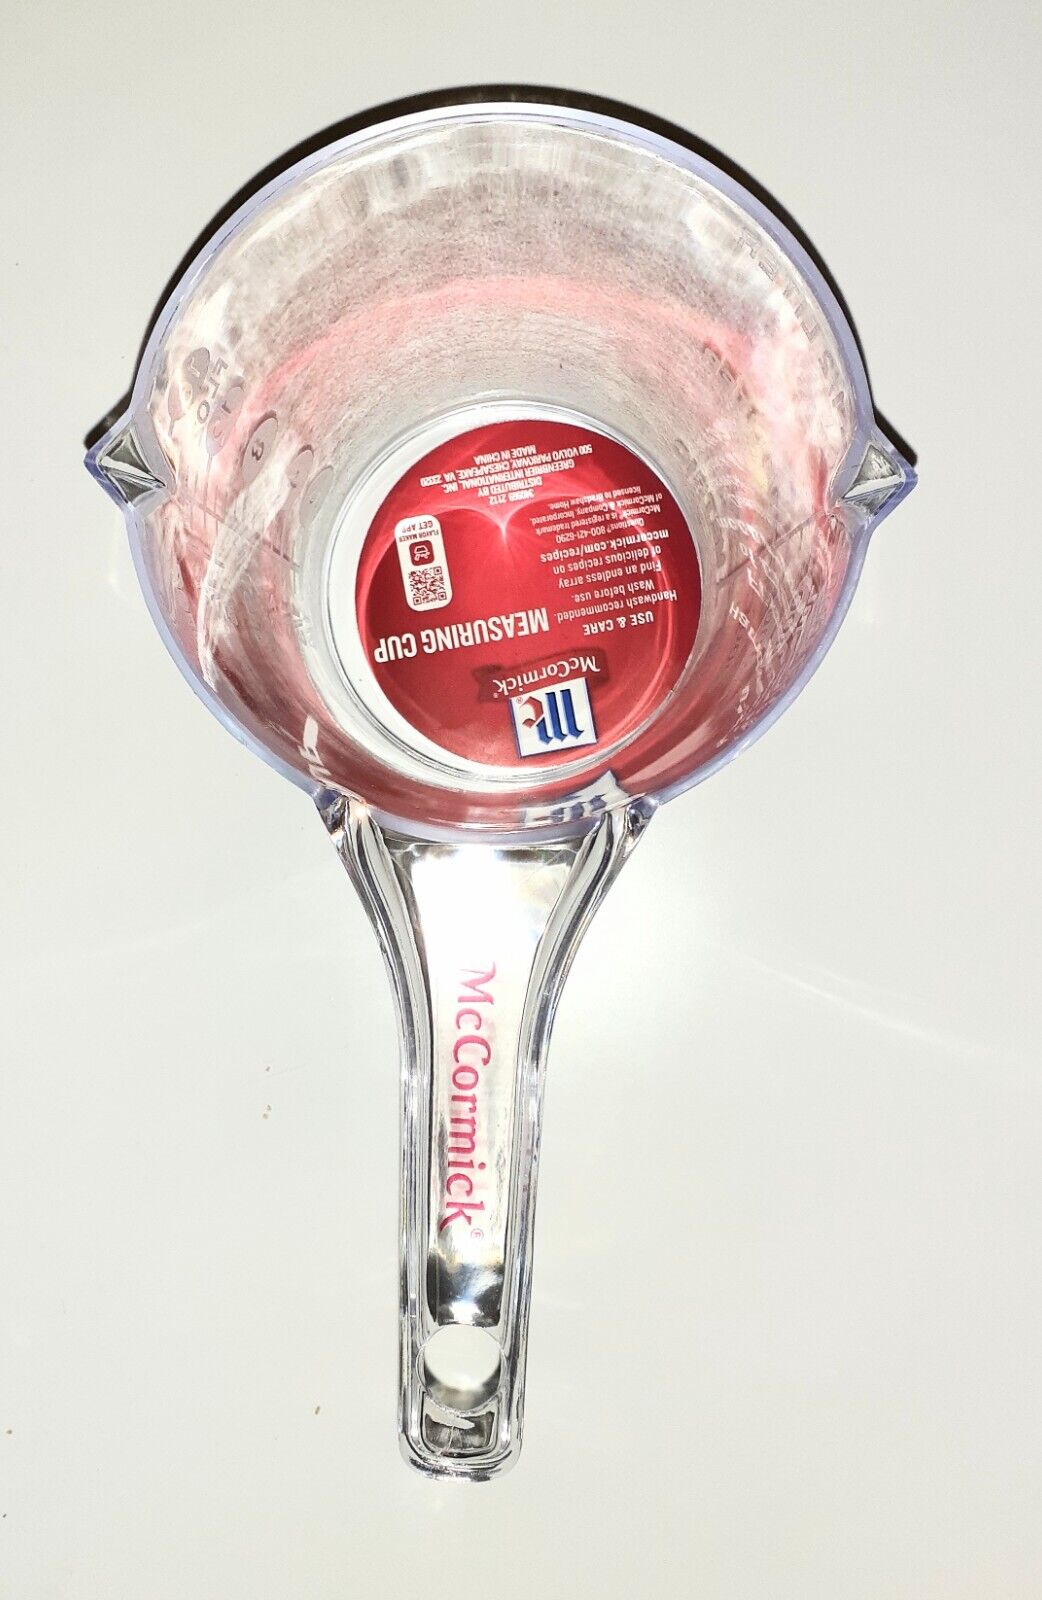 McCormick 2-Cup Measuring Cups